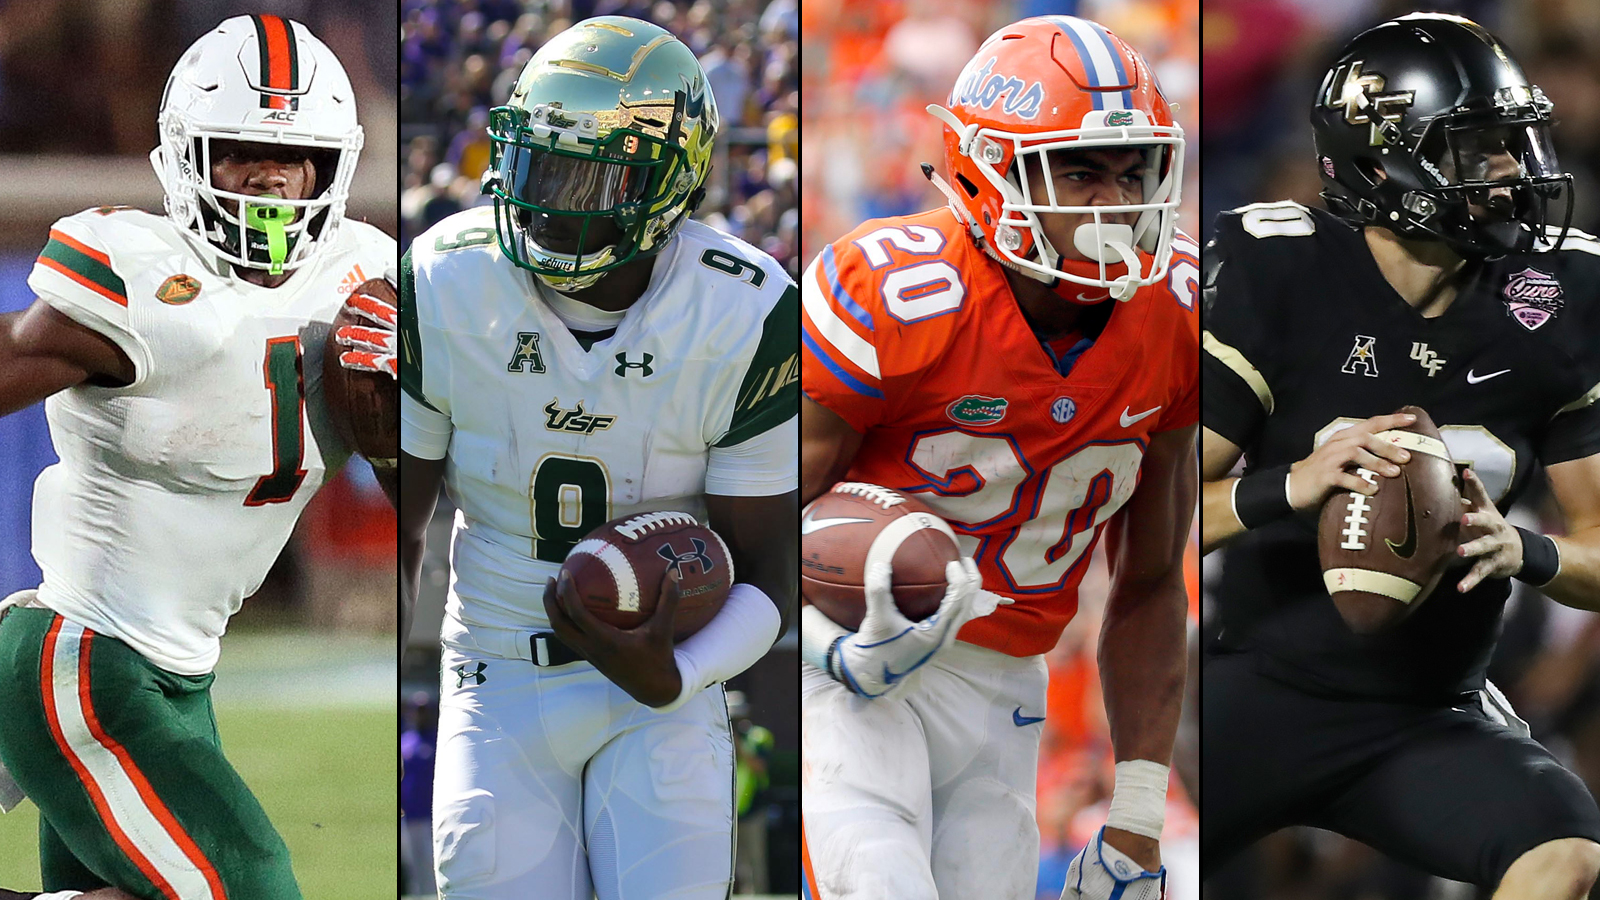 Miami moves up 1 spot, UCF joins ranks in newest AP poll